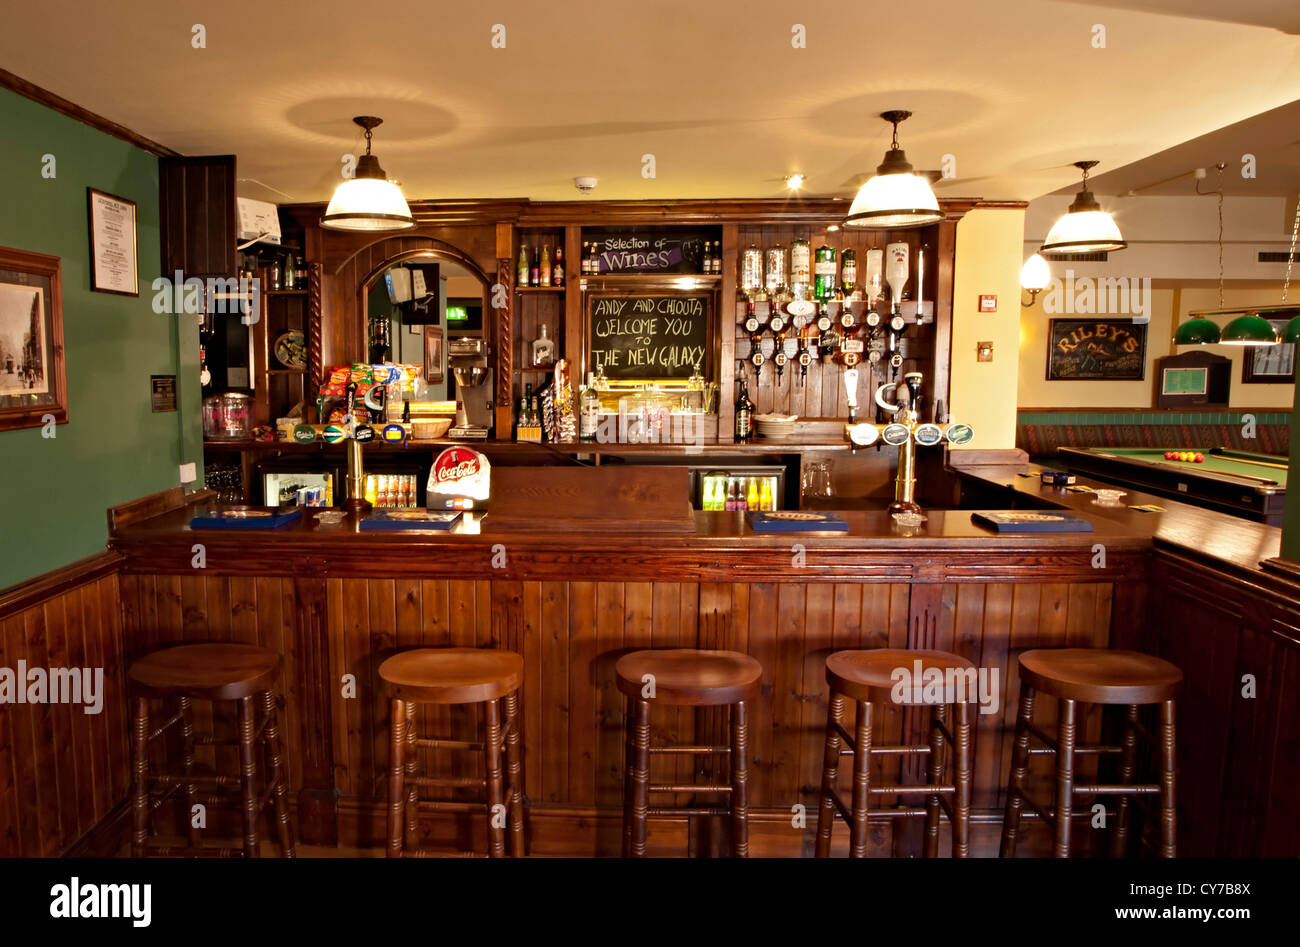 the new galaxy pub bar with beer pubs Stock Photo